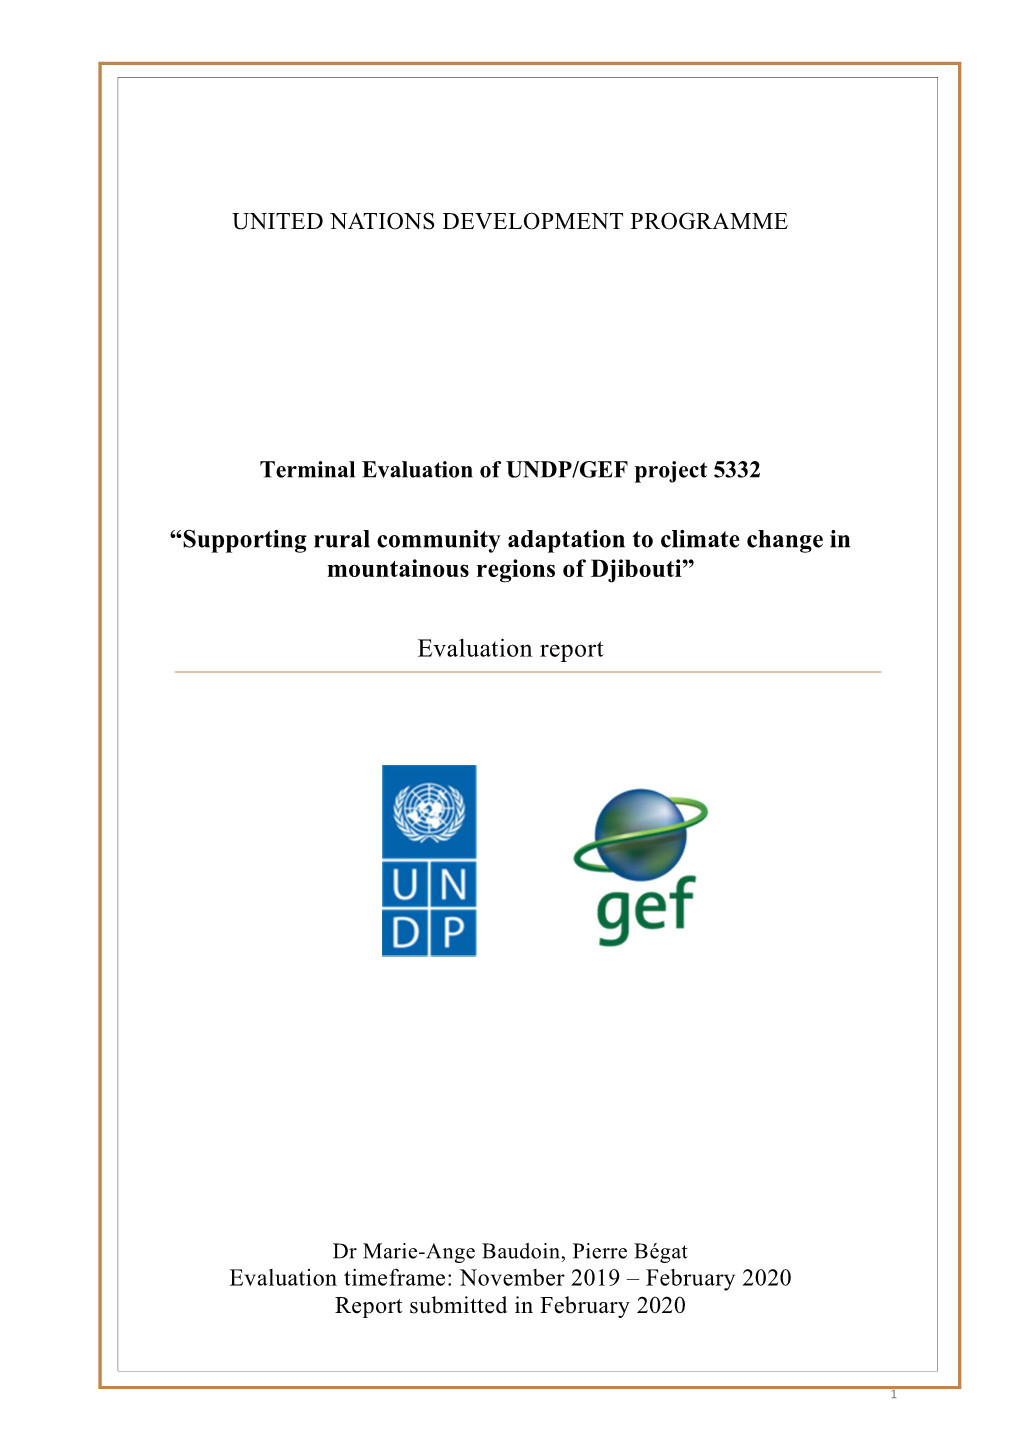 “Supporting Rural Community Adaptation to Climate Change in Mountainous Regions of Djibouti”